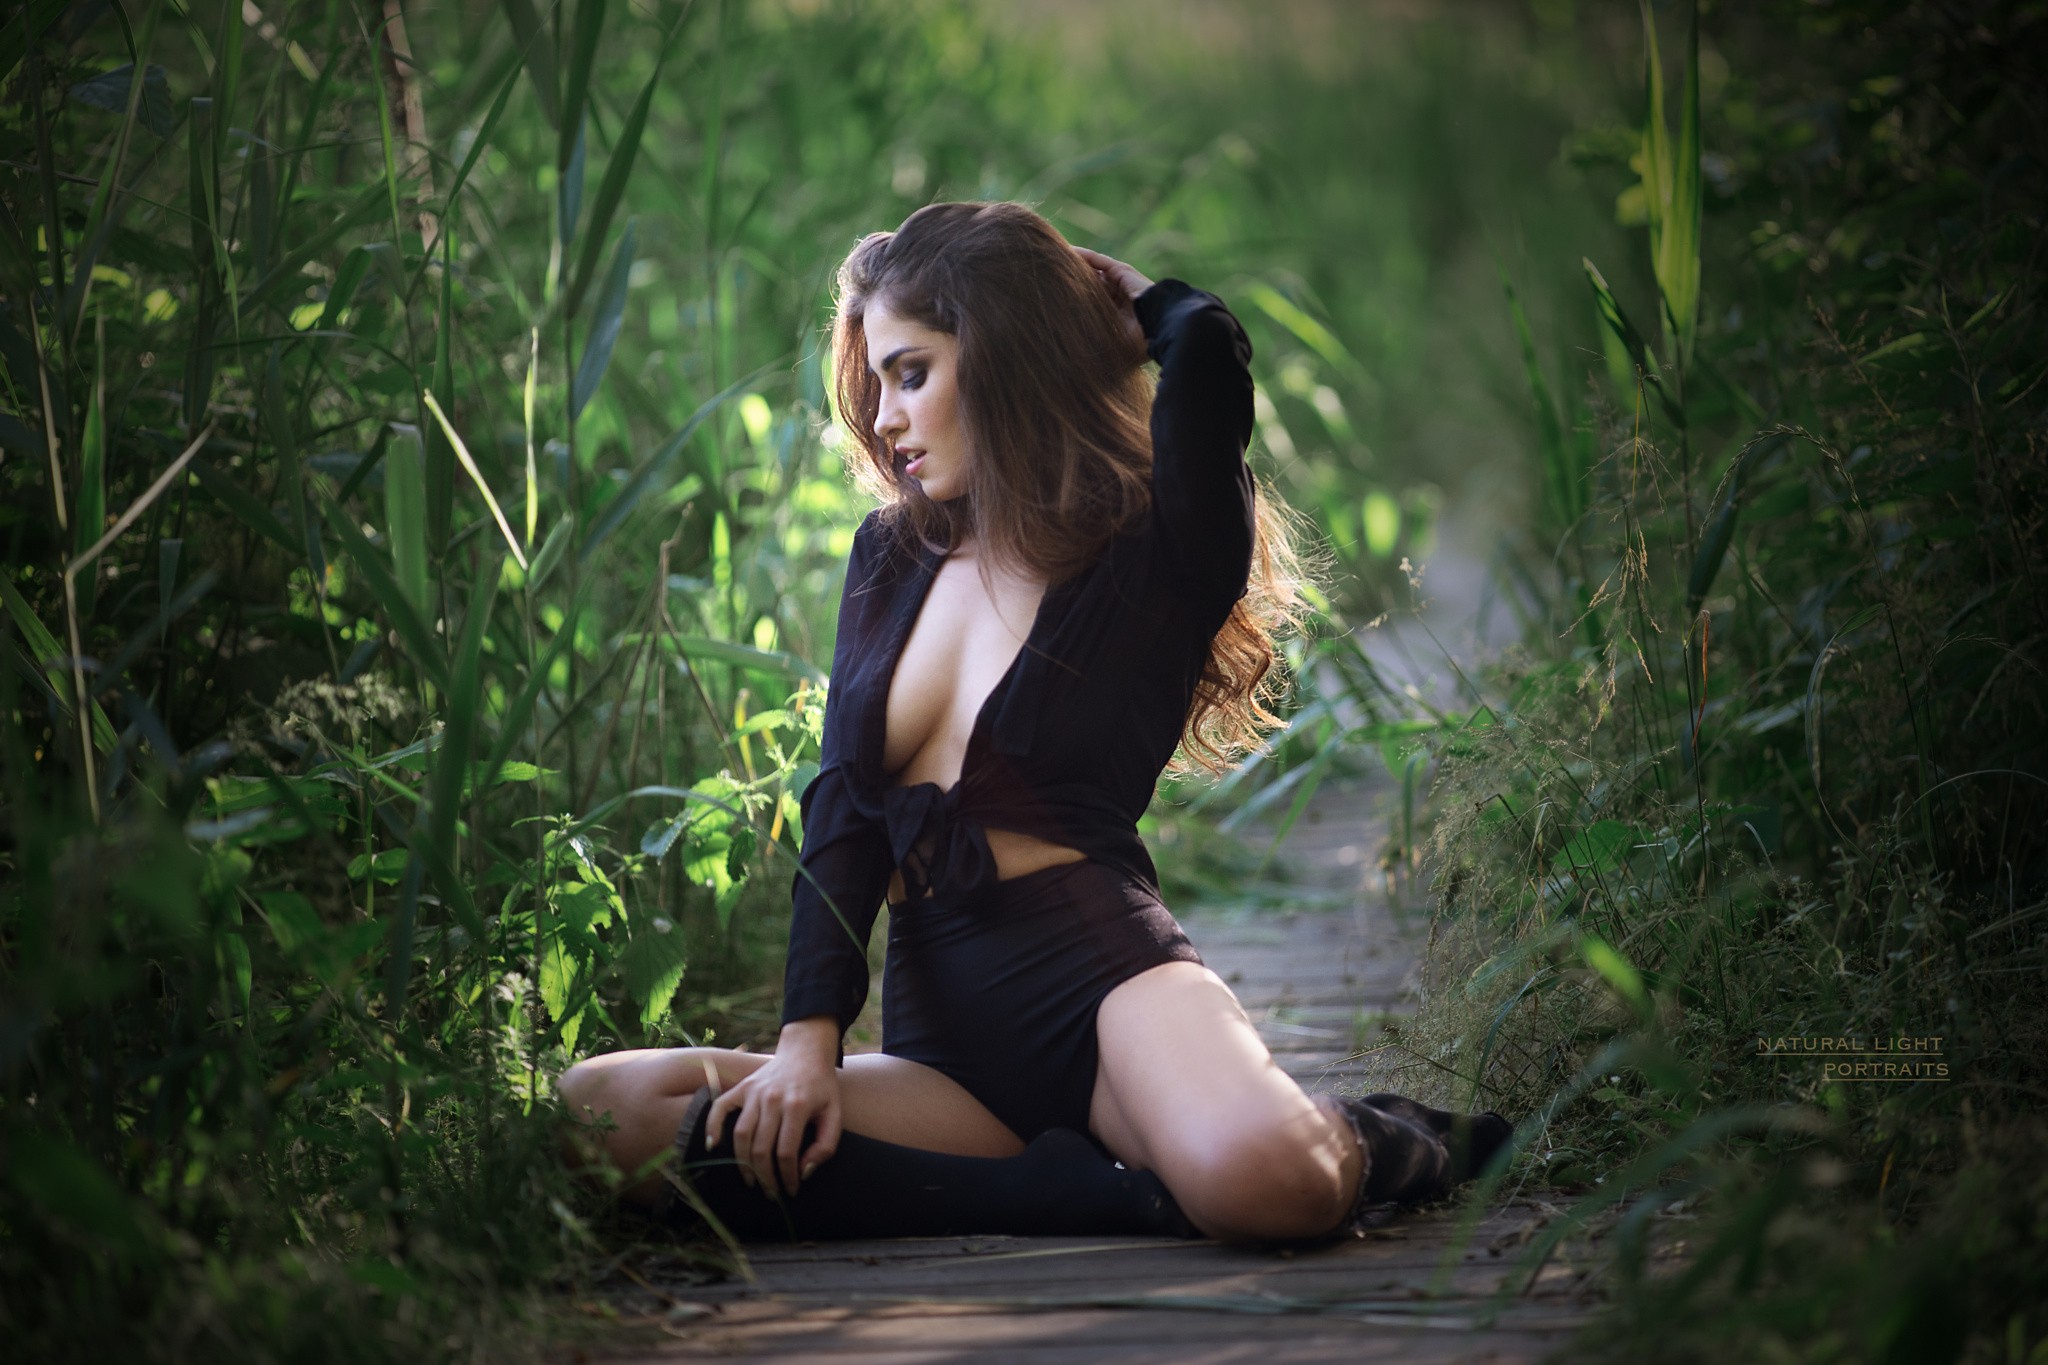 Free photo Picture of a girl in black lingerie in nature